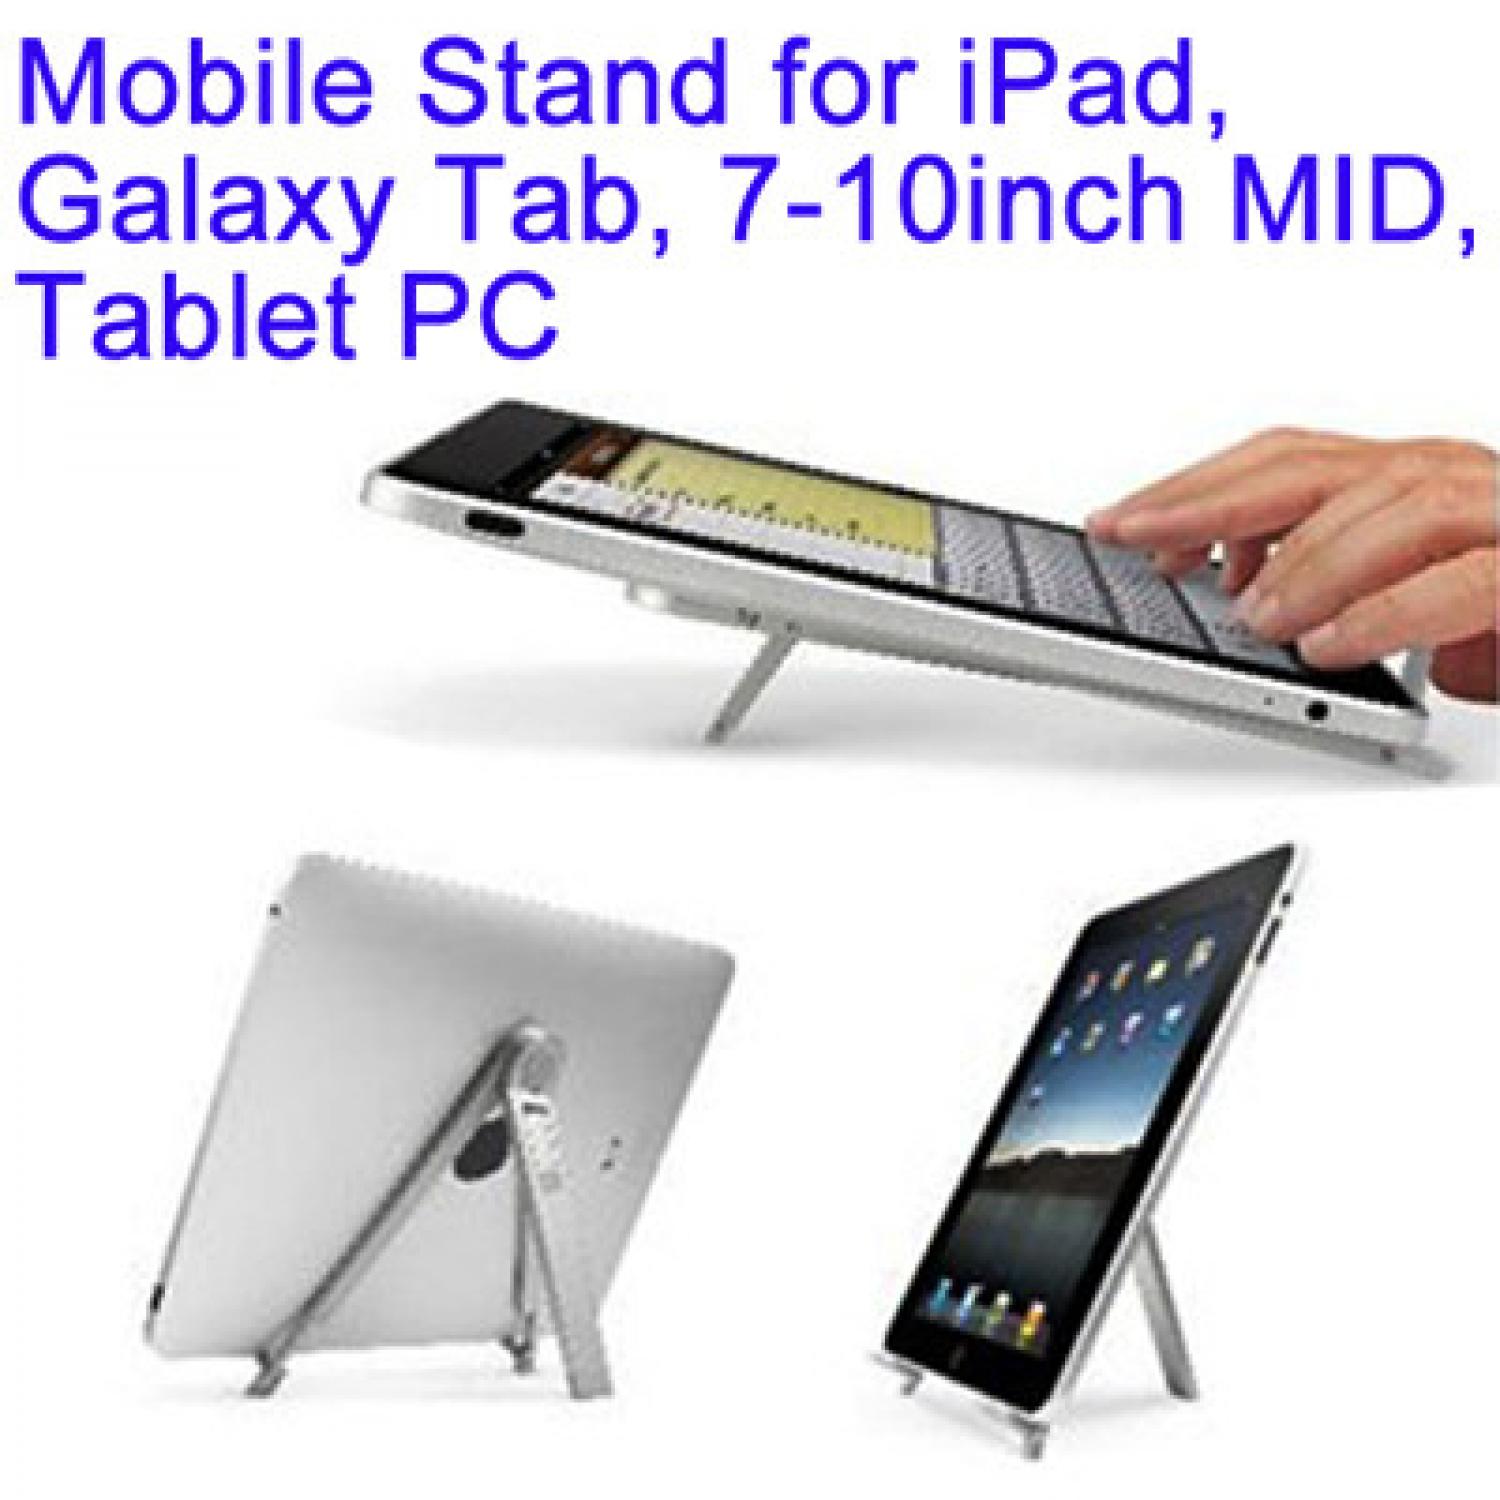 SIFREE Tripod Mobile Stand for iPad/ Galaxy Tab 7-10inch MID Tablet PC